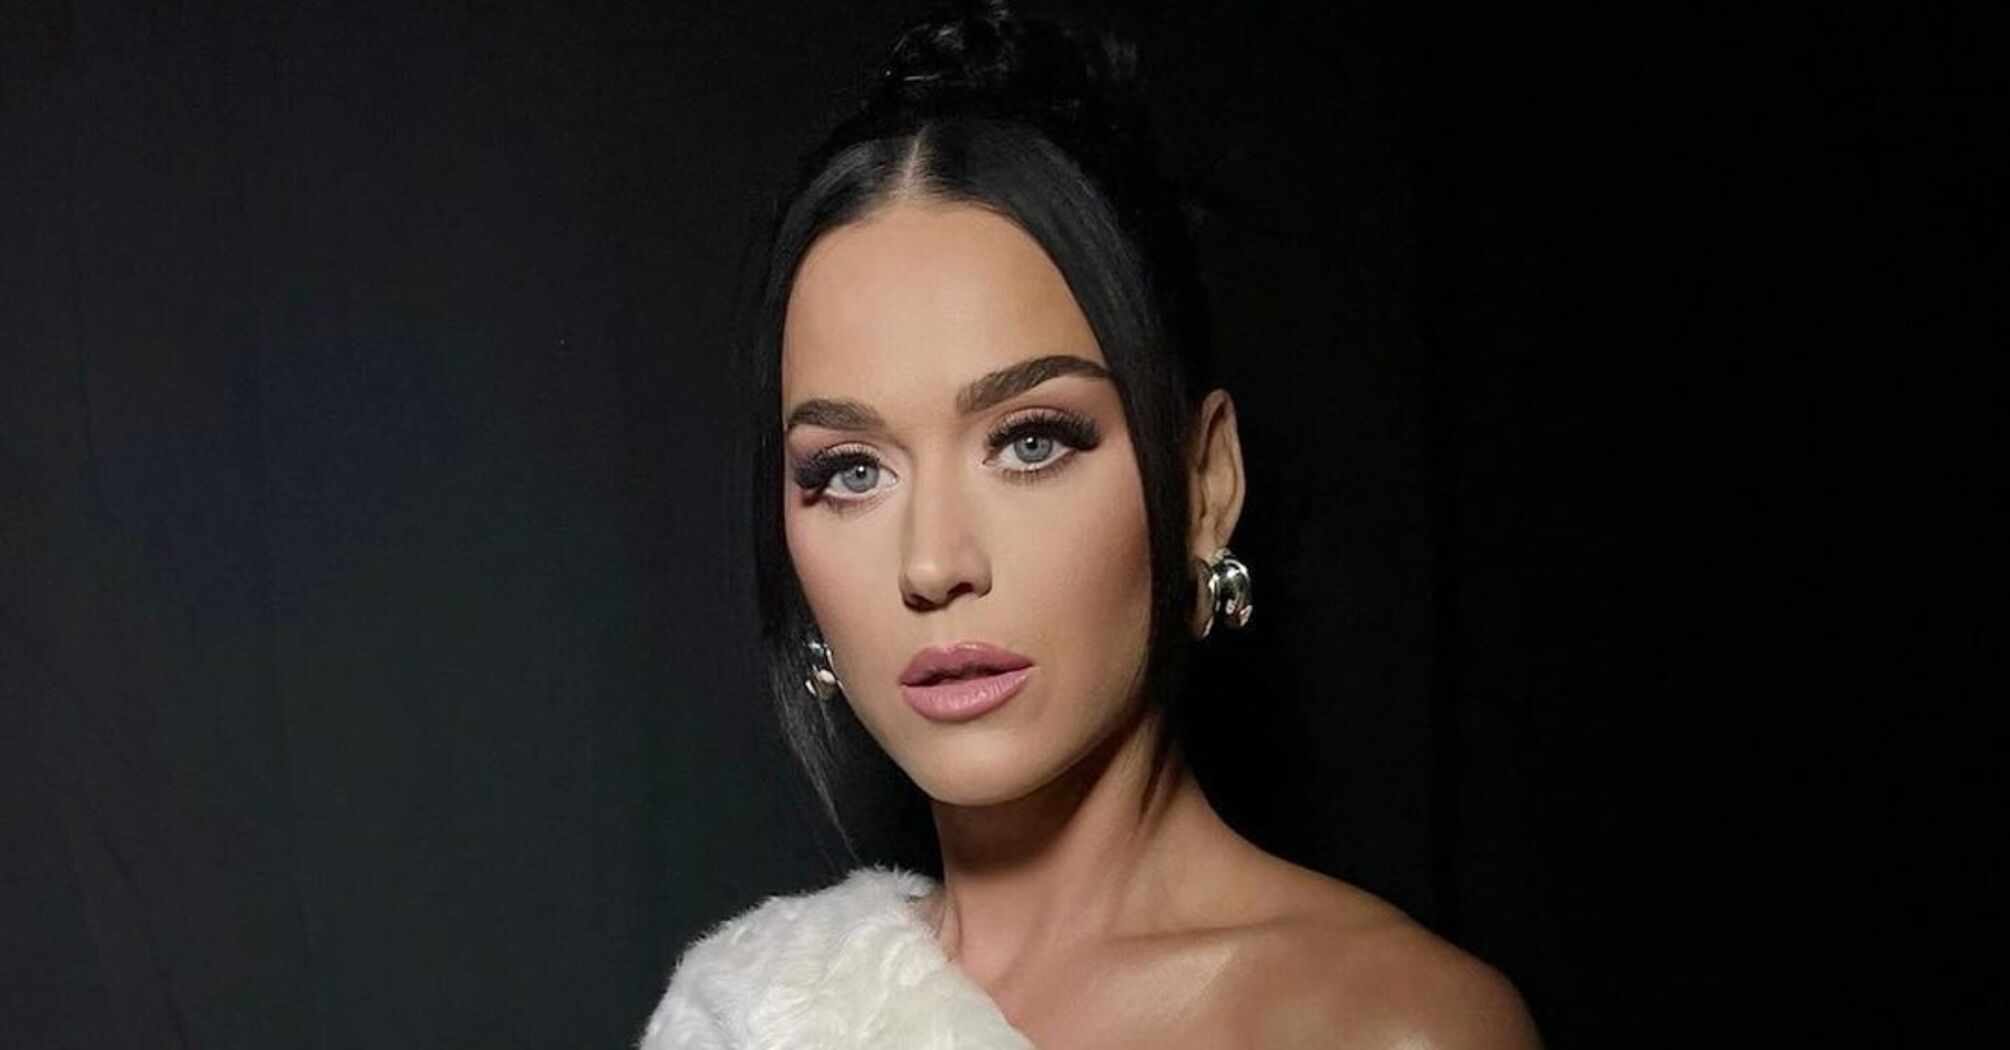 Family of 84-year-old veteran sues Katy Perry over $15 million home: singer accused of 'encroaching' on home